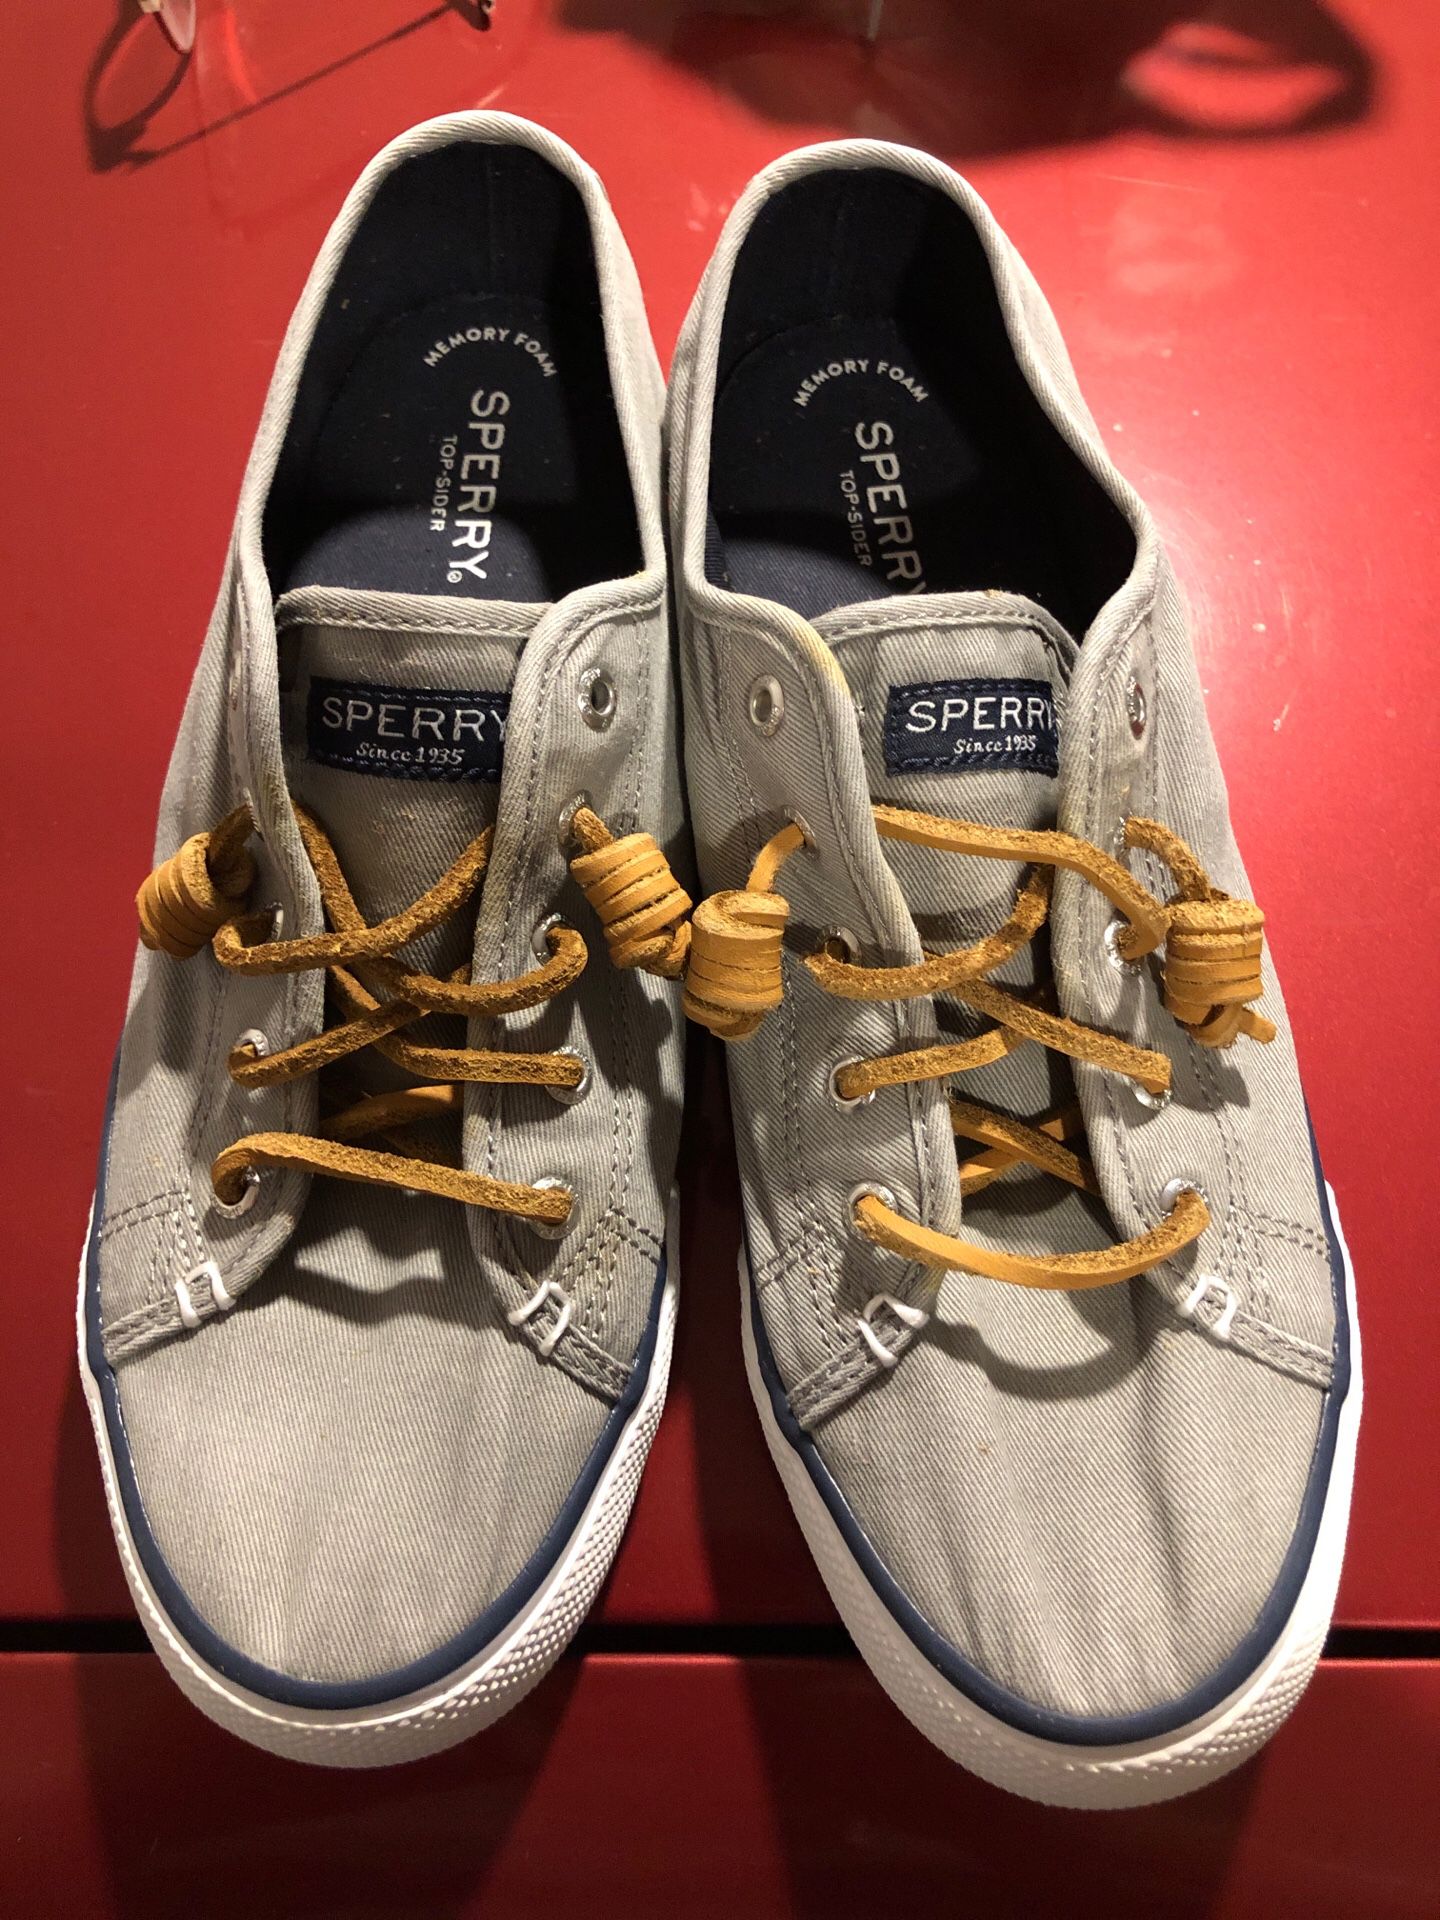 Women’s Sperry shoes and Womens Michael Kors shoes